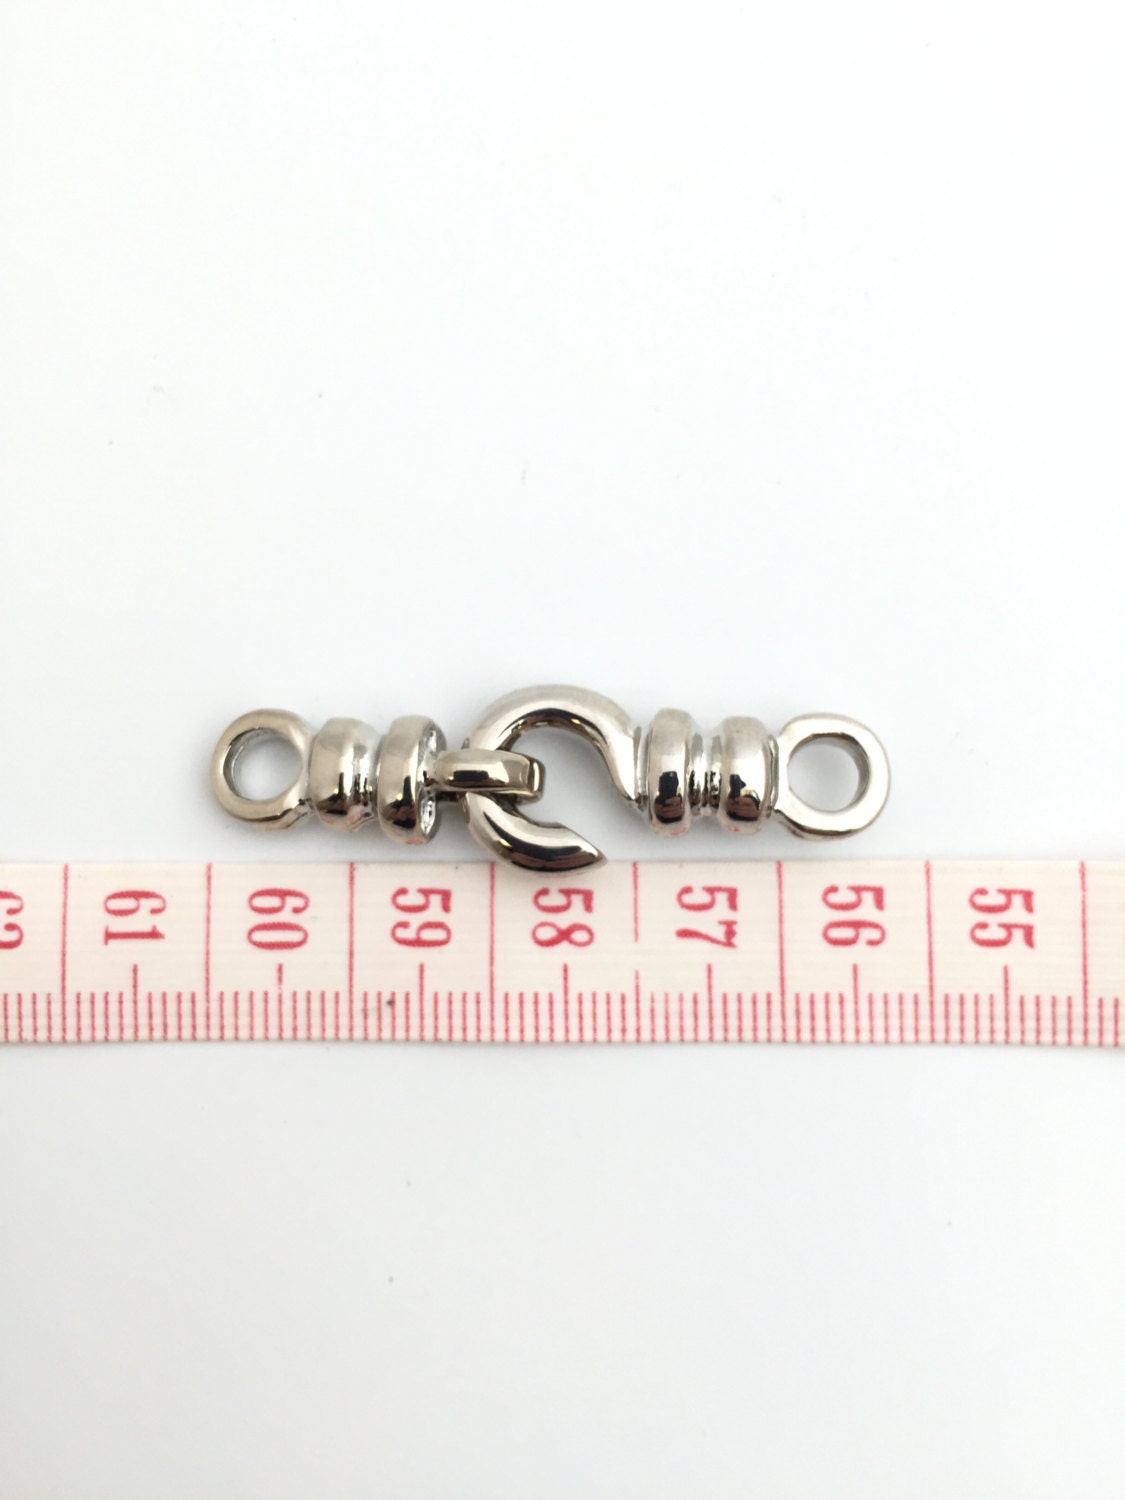 34x10mm Brass Hook & Eye Clasps, Silver Color, 4mm Hole, Jewelry Clasps,  Metal Closure, Bracelet and Necklace Making Supply, Jewelry Finding